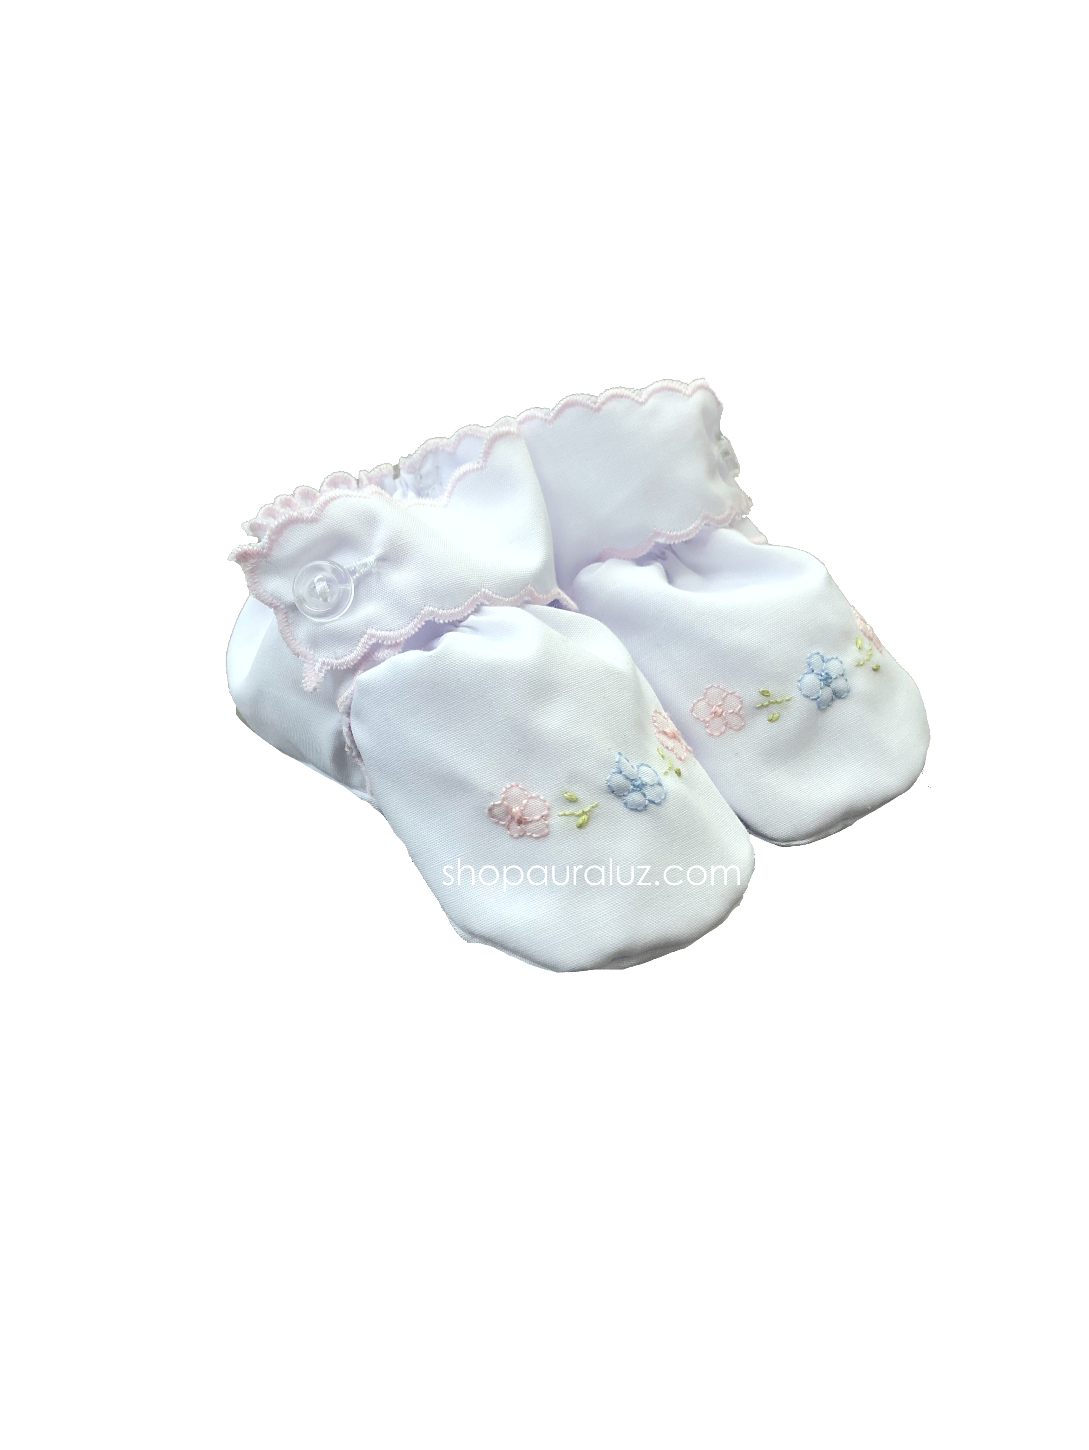 Auraluz Baby Shoe...White with pink scallops and embroidered flowers